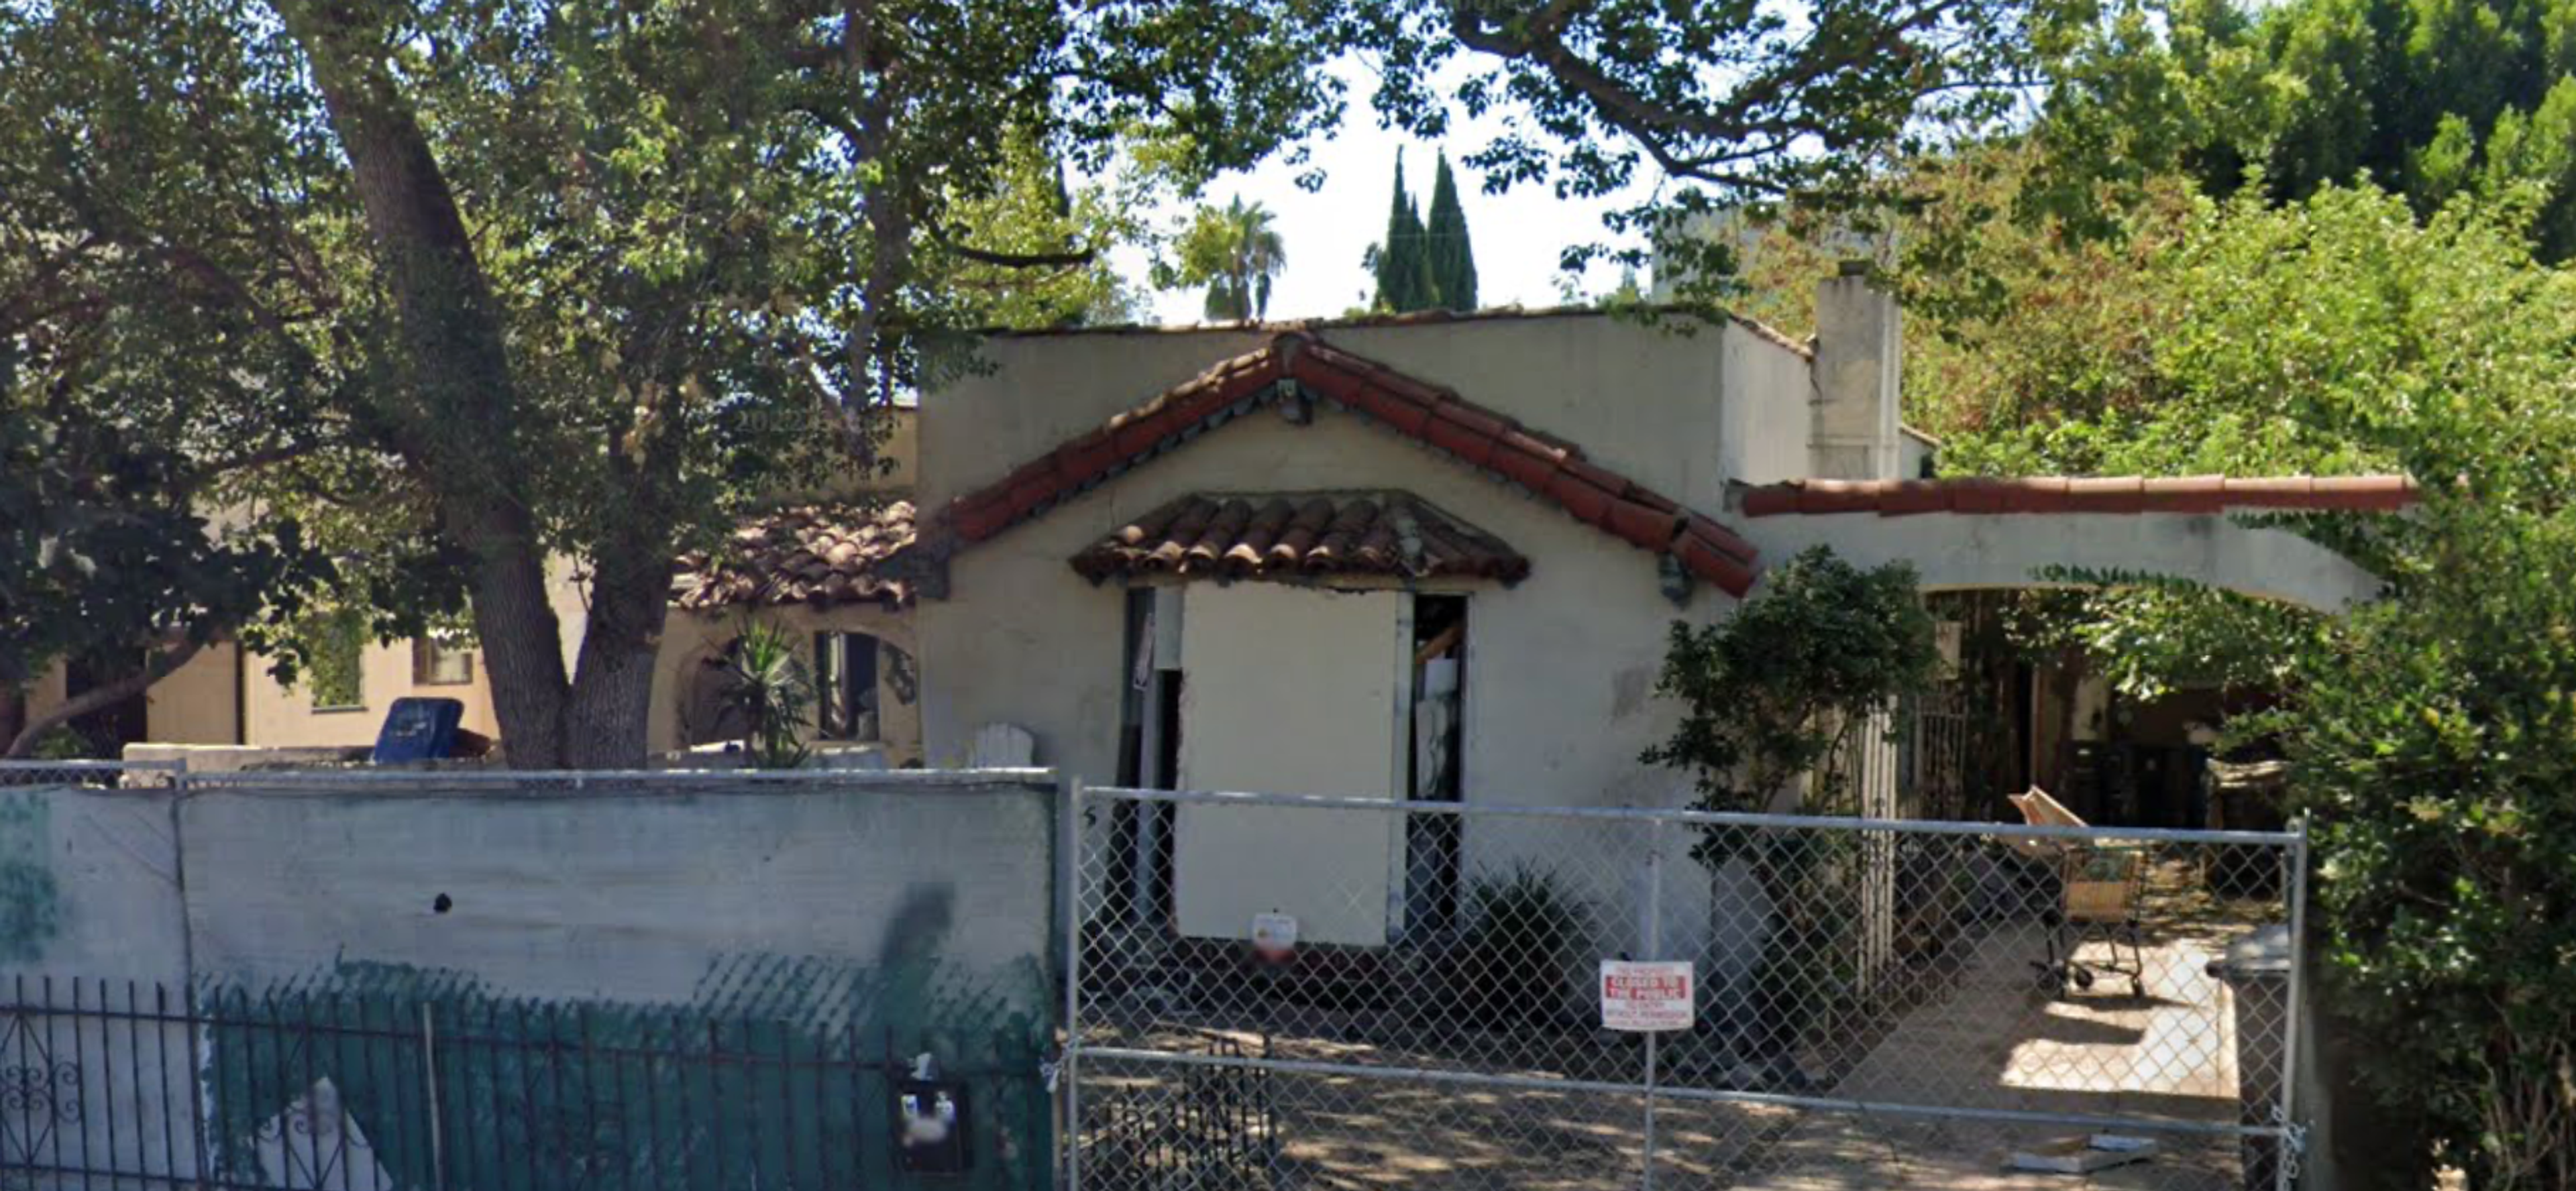 Screenshot of 10936 Otsego Street, a Spanish-style cottage with a fence, boarded up windows, and obvious signs of neglect.